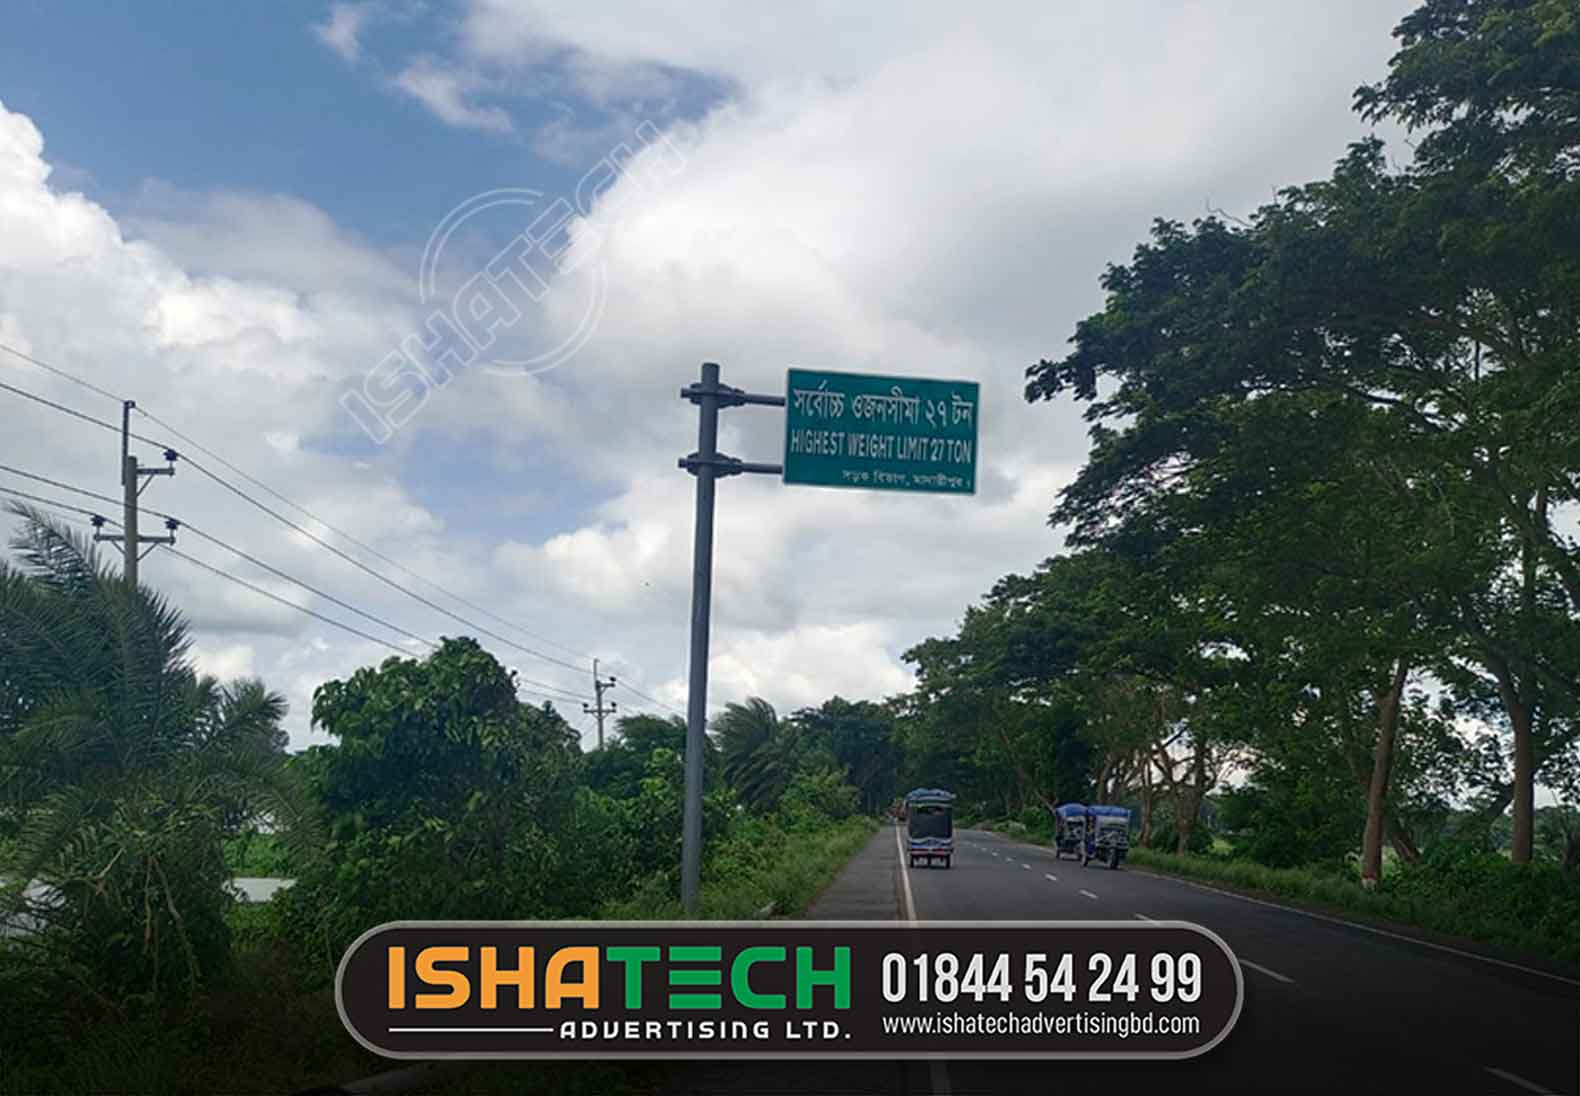 speed limit signboard making bd | traffic signs bangladesh pdf. traffic signs brta pdf. traffic signs in bangladesh. how many traffic signs in bangladesh. bangladesh road sign manual bangla. traffic signs pdf free download. traffic sign in bangladesh pdf bangla. brta traffic sign manual.